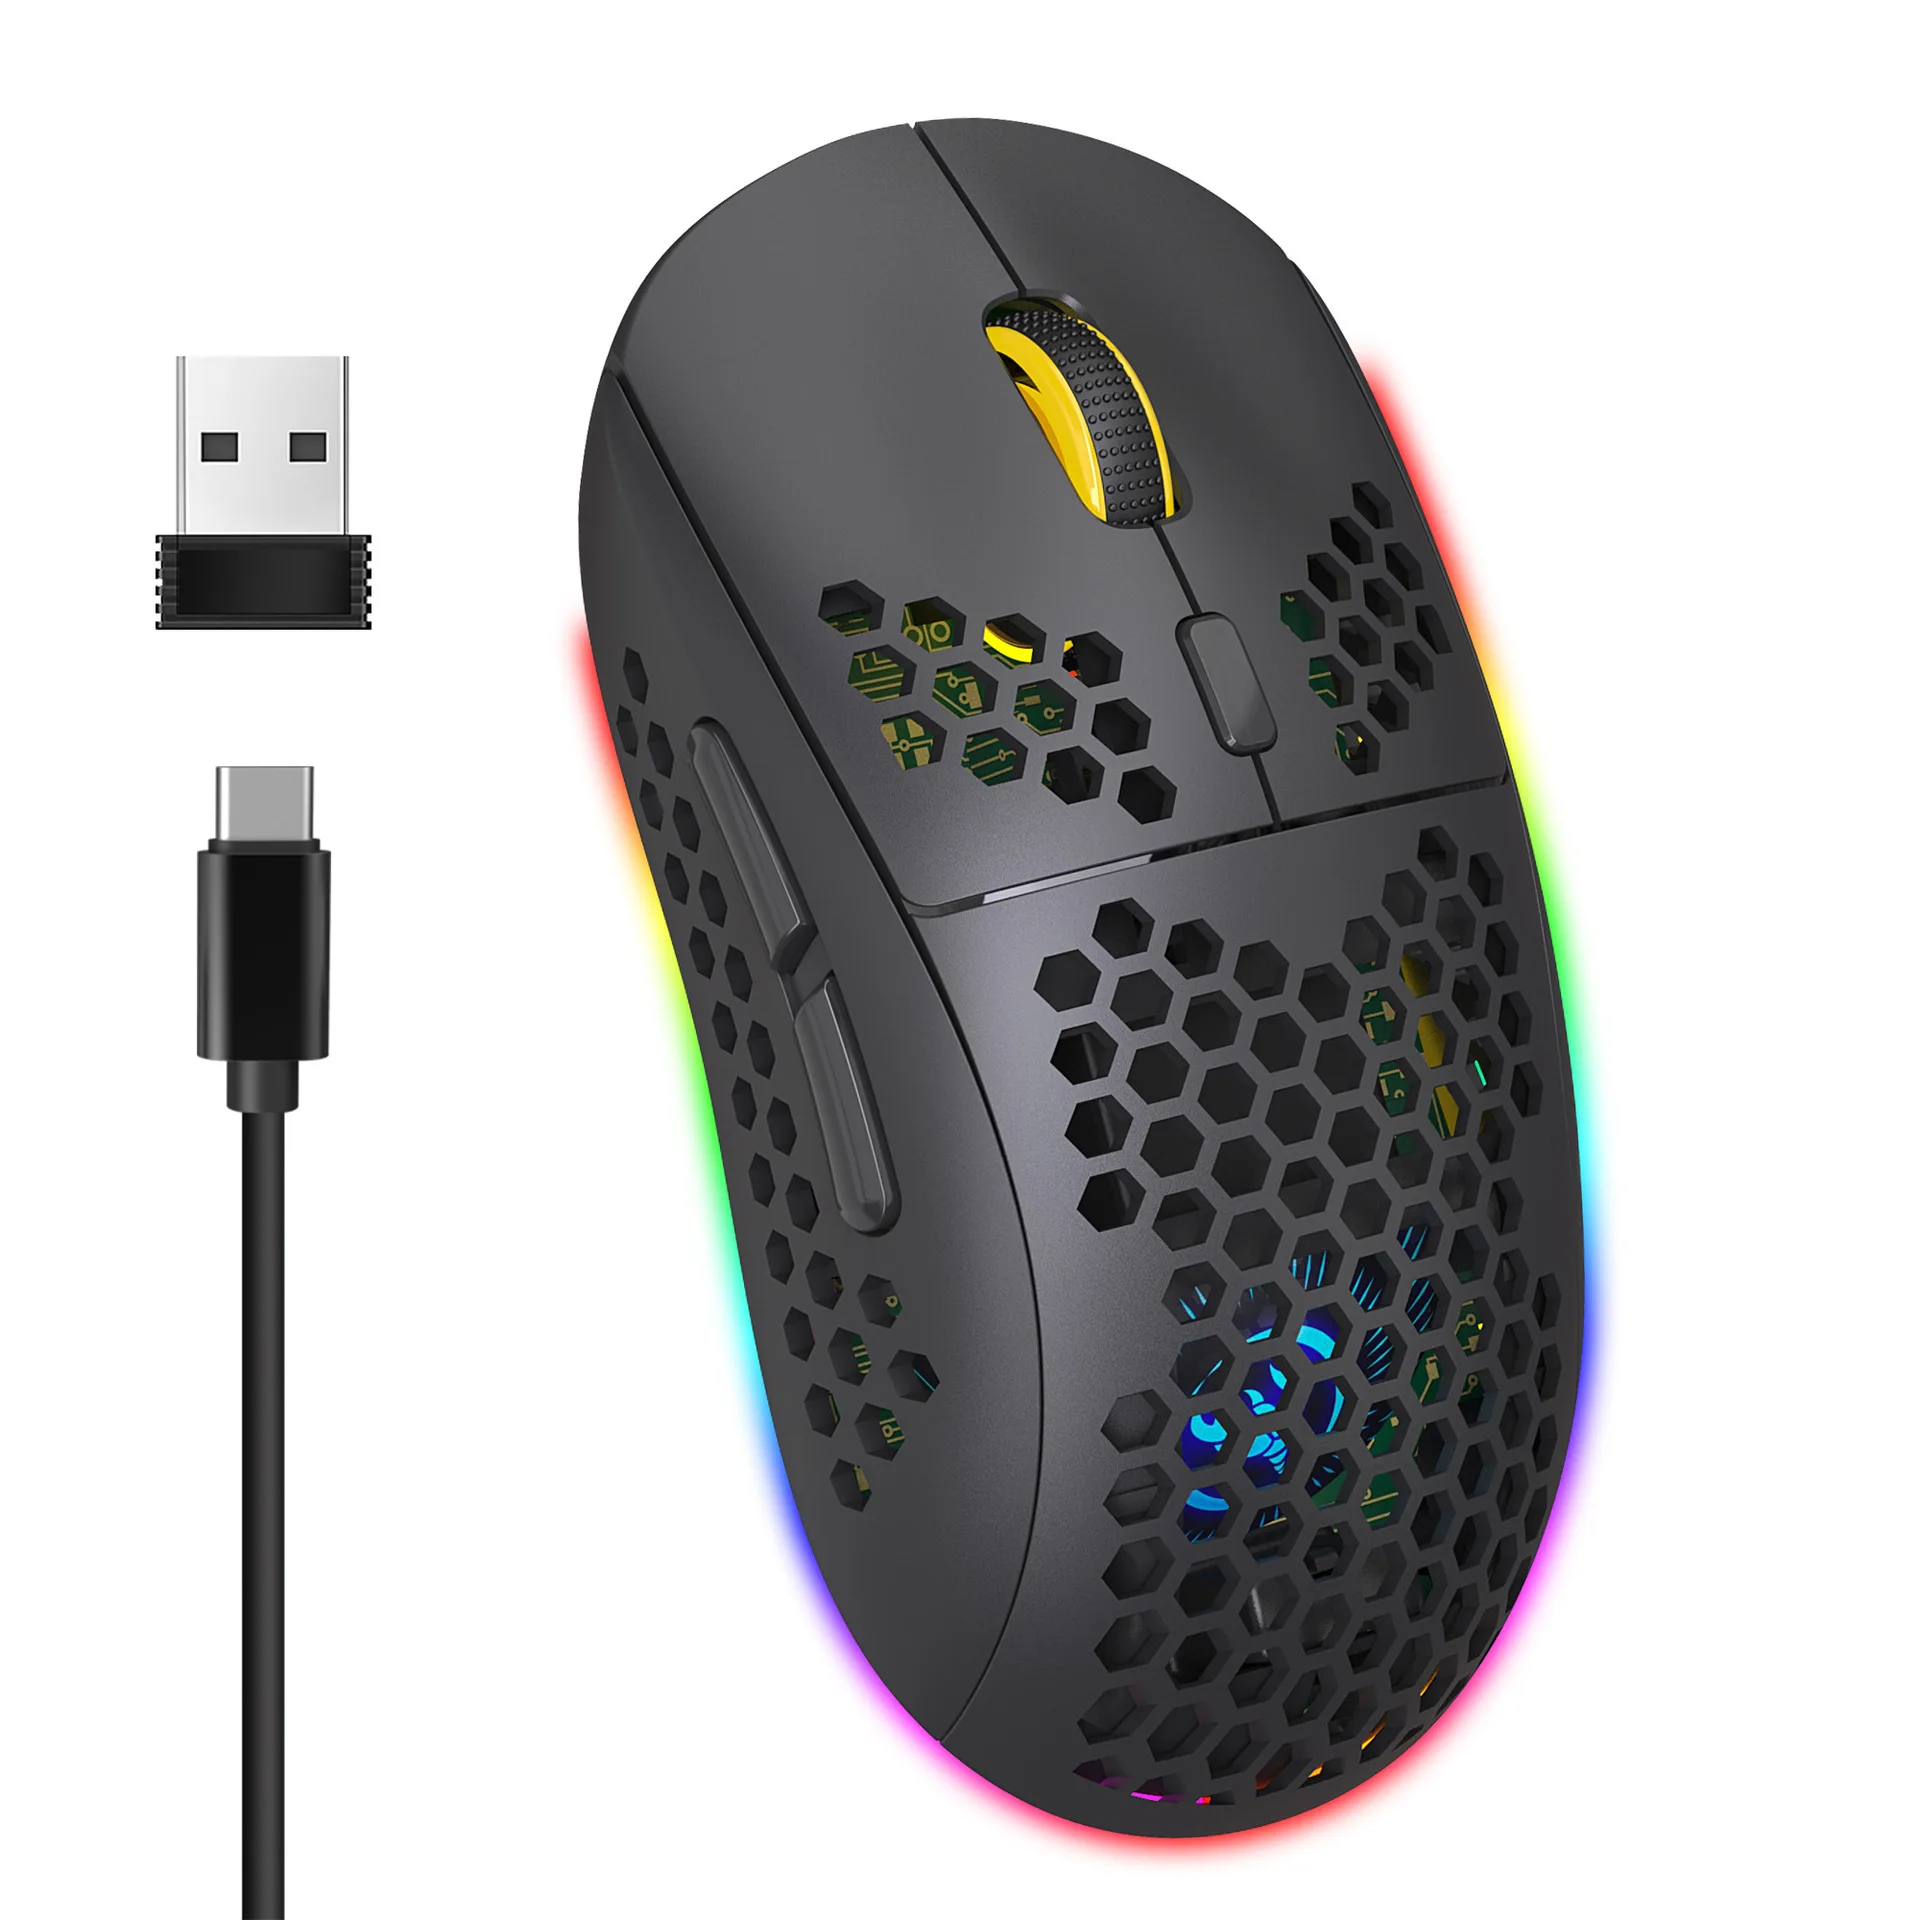 

3600 DPI 2.4GHz Wireless Mouse RGB Glow with USB Receiver TYPE-C Rechargeable Mouse Mice for Computers Gaming PC